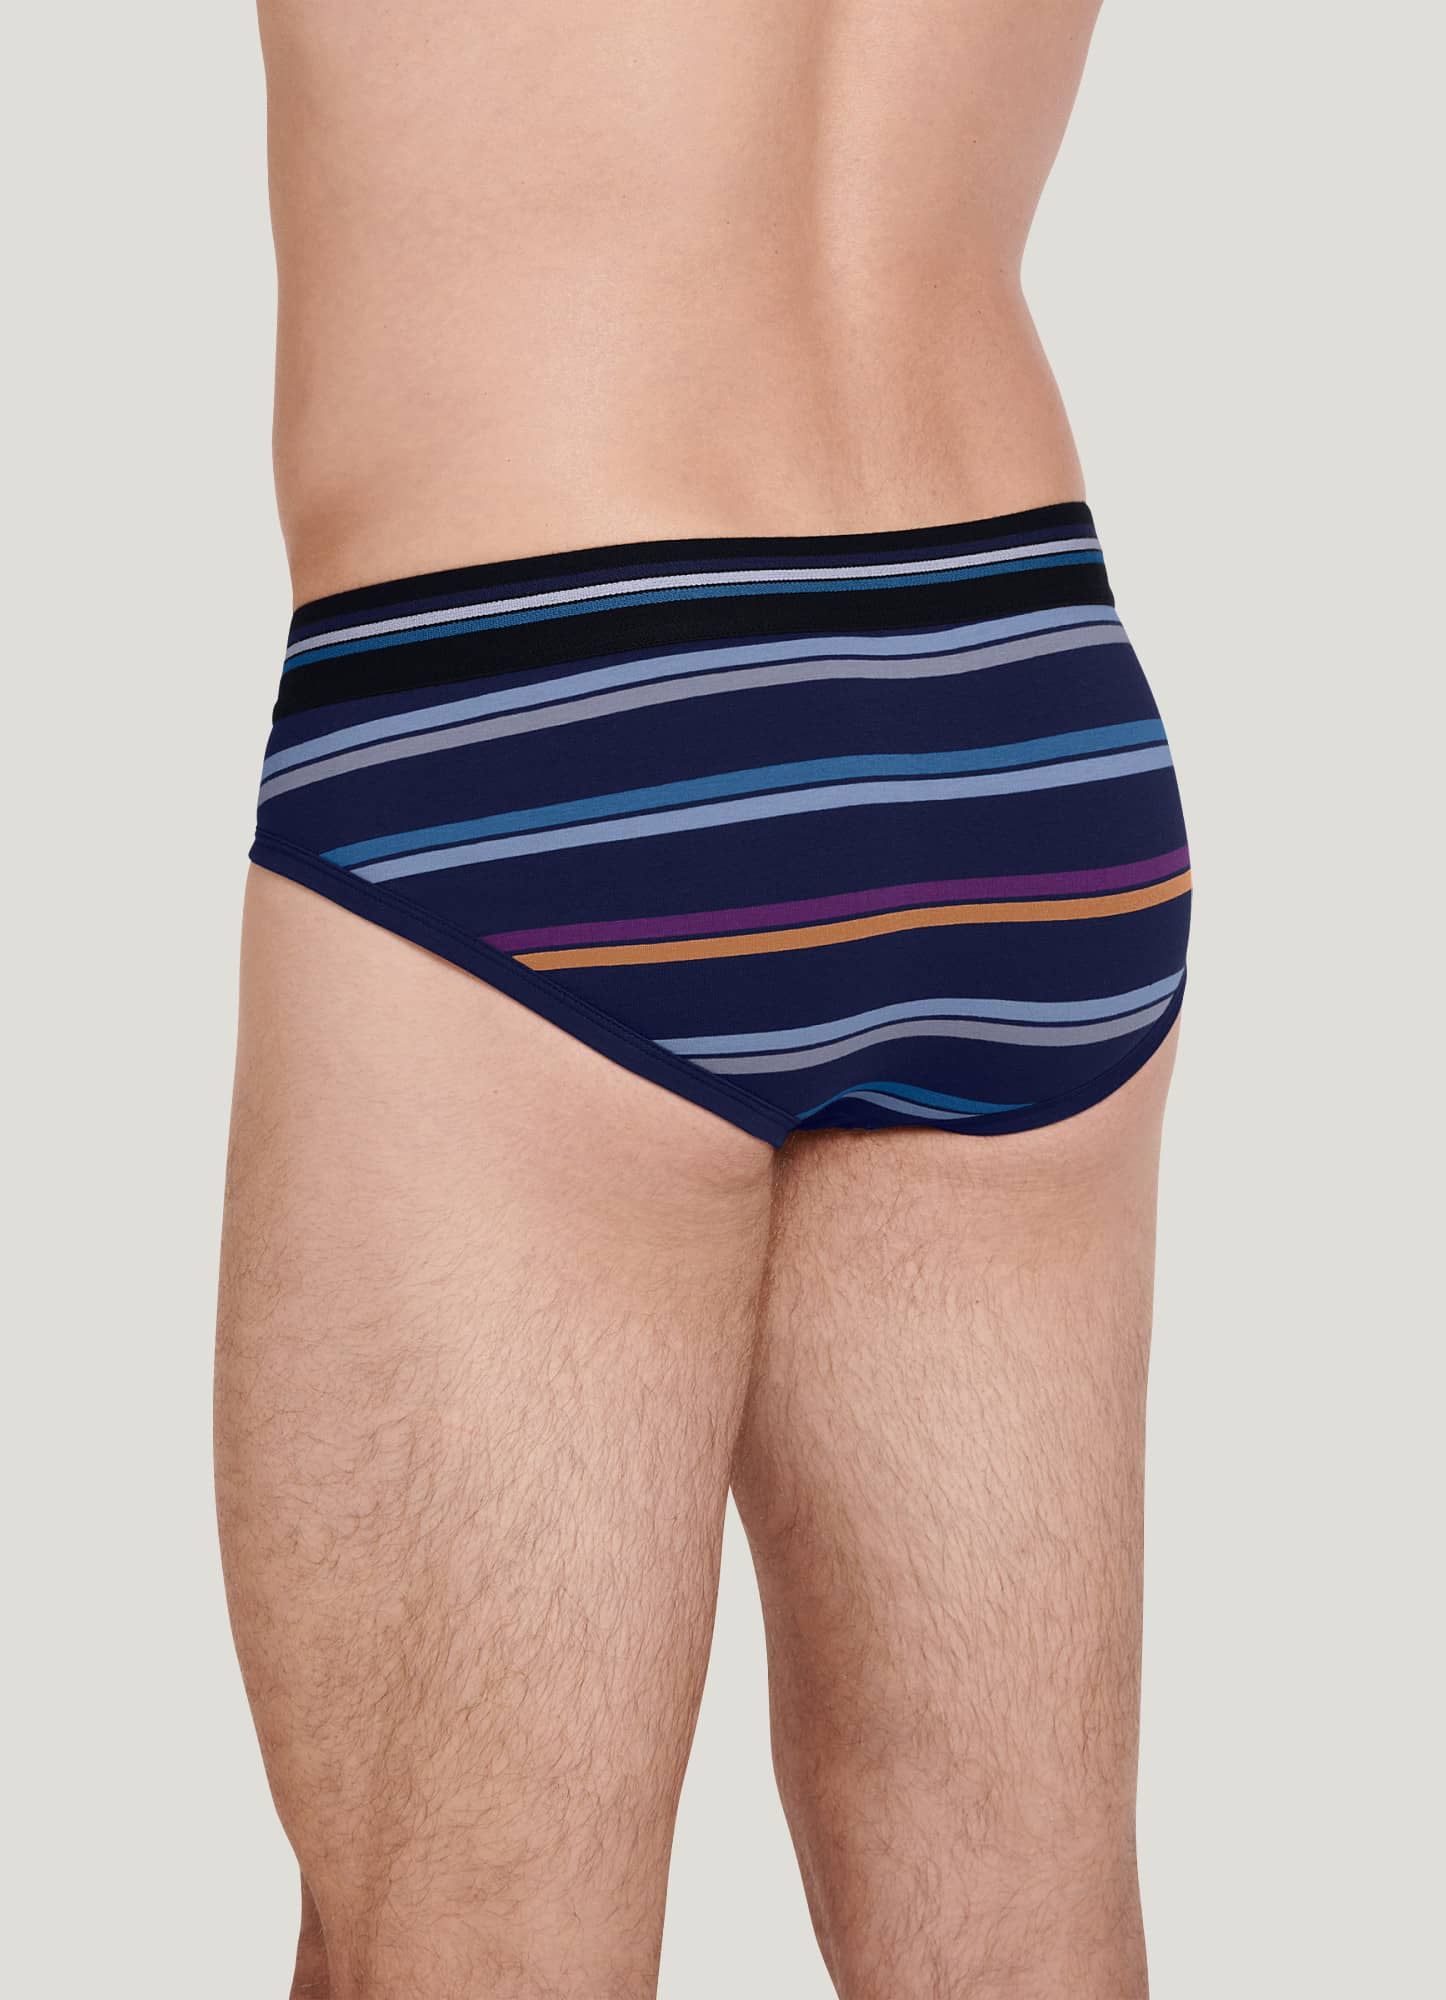 Papi Solid and Stripe Comfort Underwear Trunks (Pack of 4) (Men's)